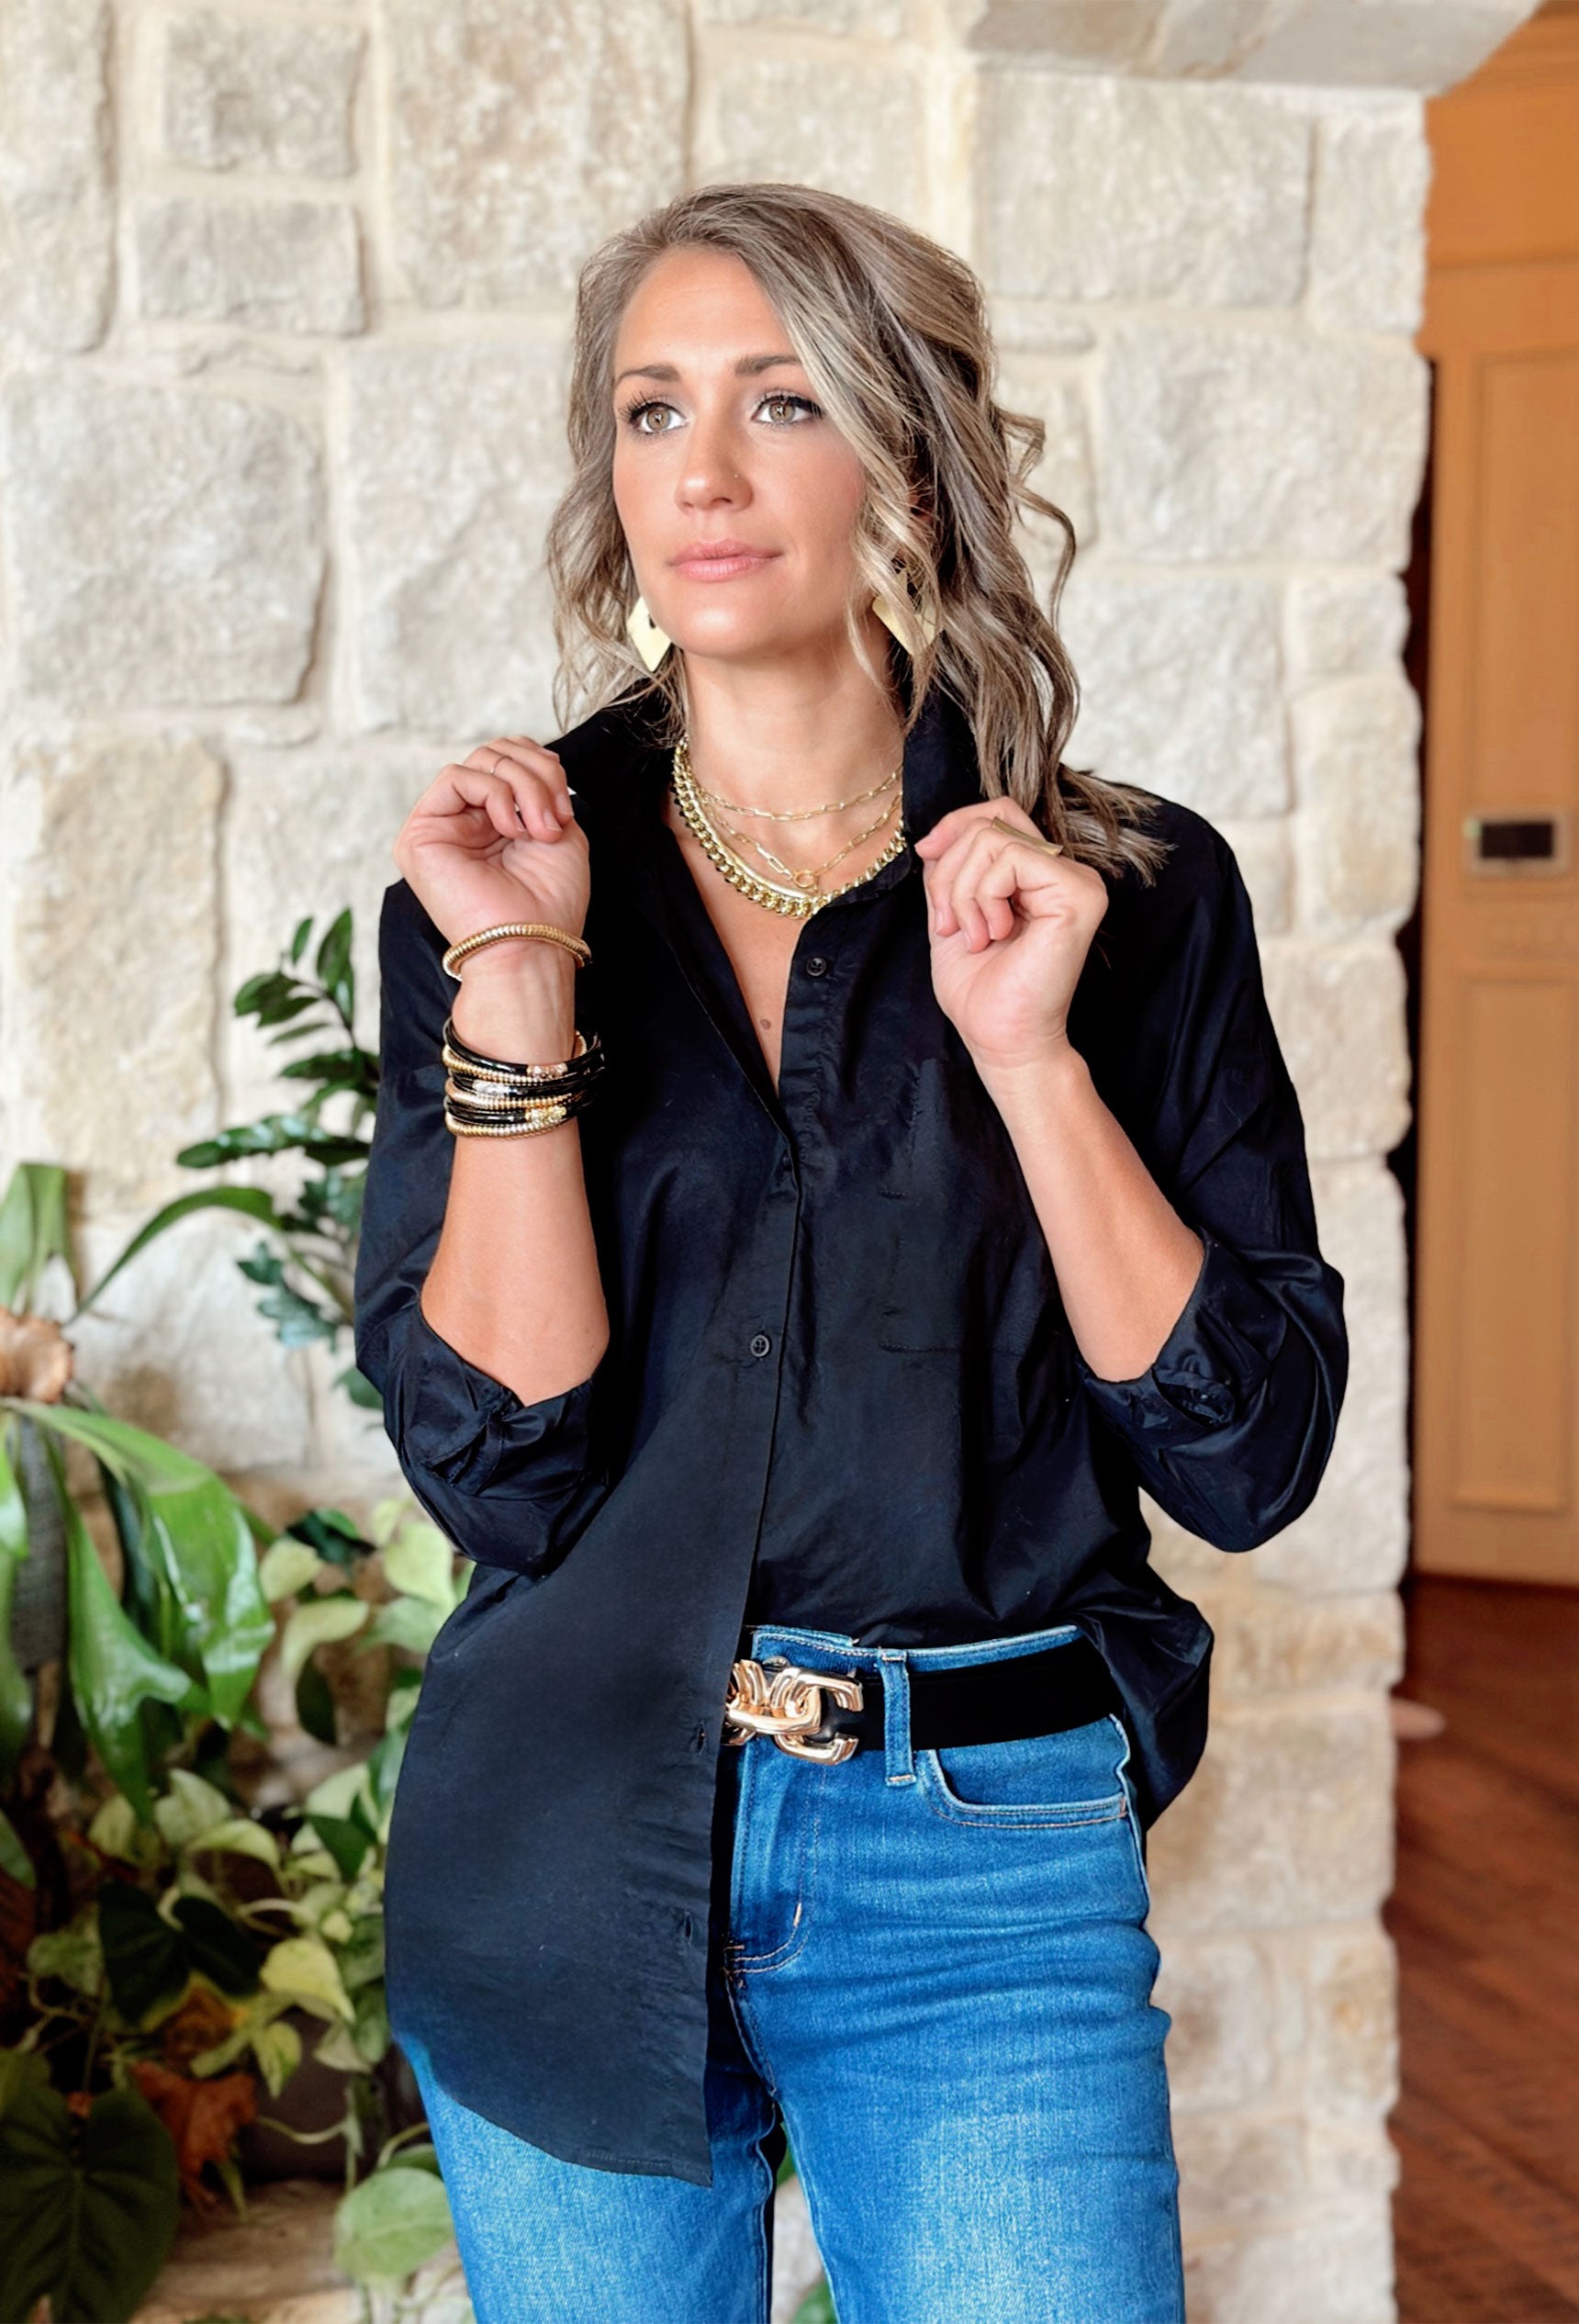 Christi Button Up Top in Black, button up long sleeve with one frocket